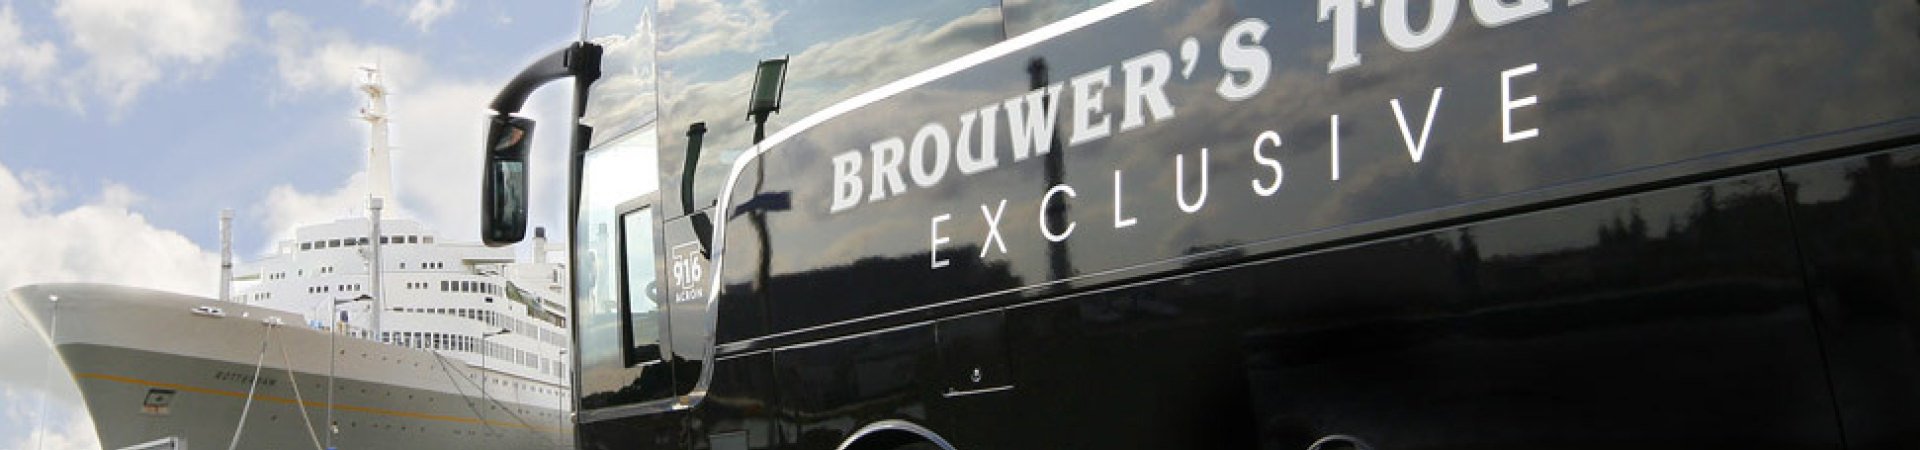 Brouwer tours 2 1920x450 18